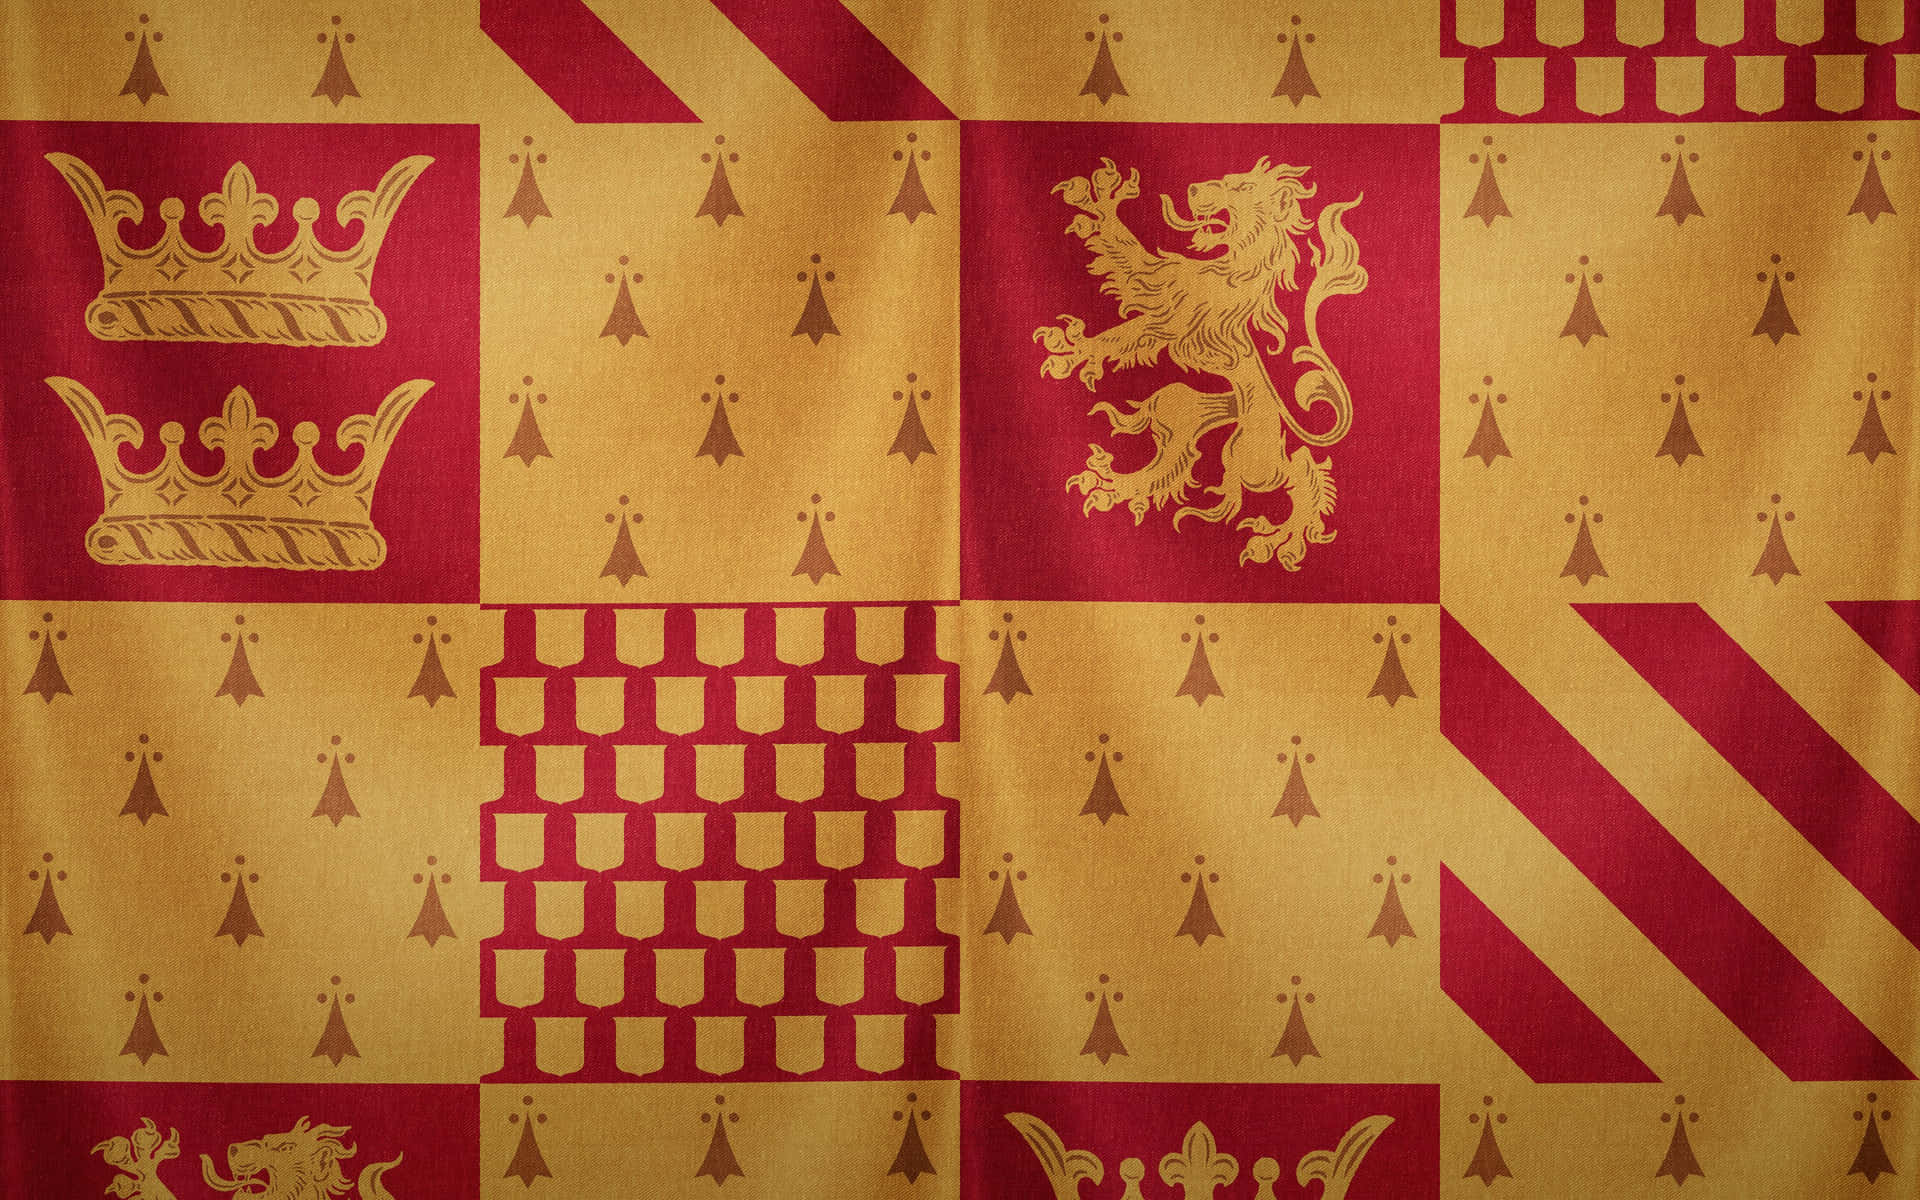 Celebrate the courage, loyalty and bravery of Gryffindor